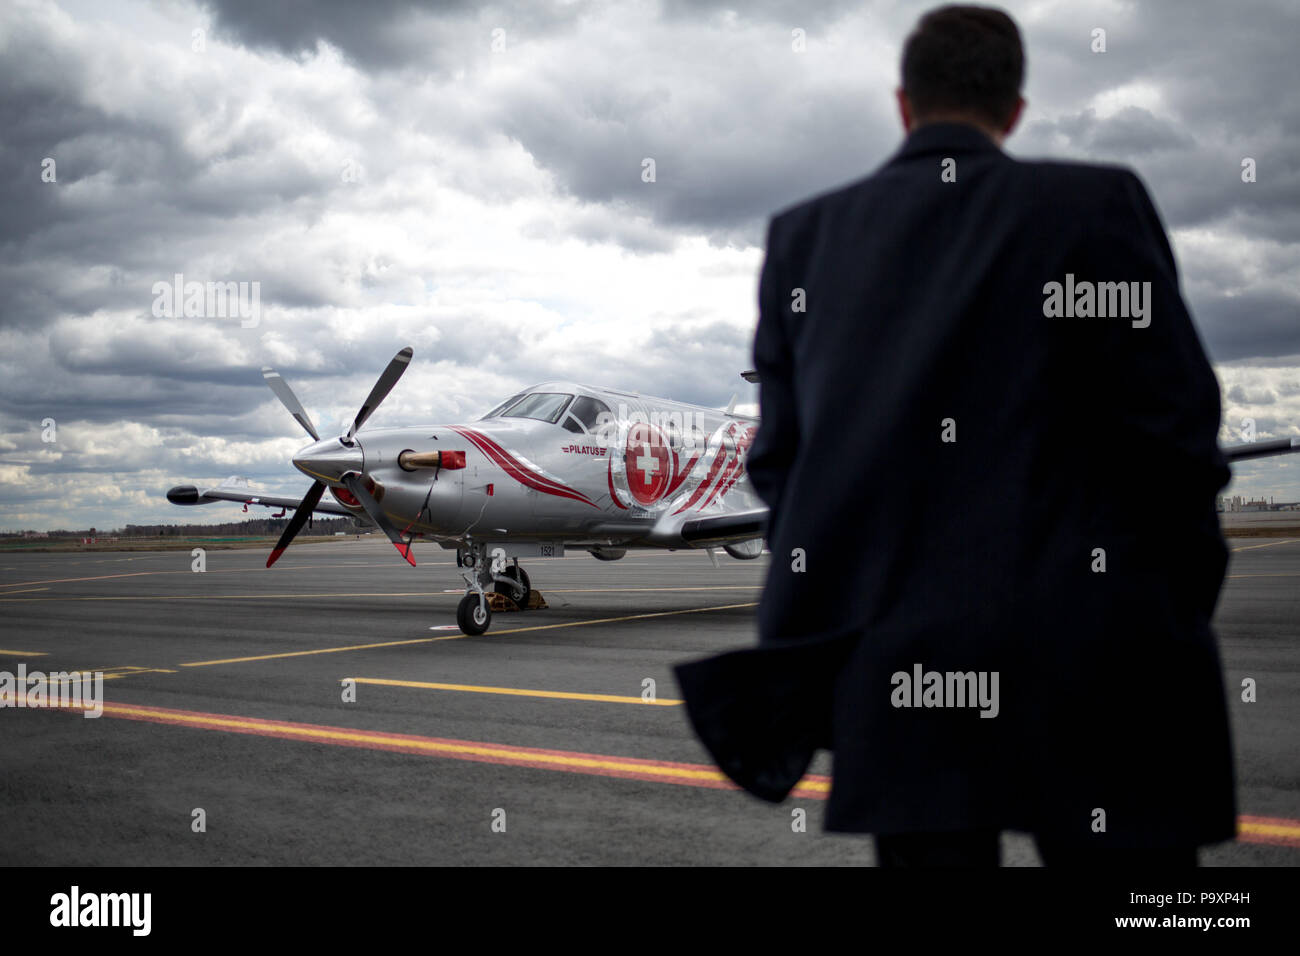 The Pilatus PC-12NG aircraft modified as a medical transportation airplane with Spectrum Aeromed equipment onboard pictured at Sheremetyevo Airport, M Stock Photo